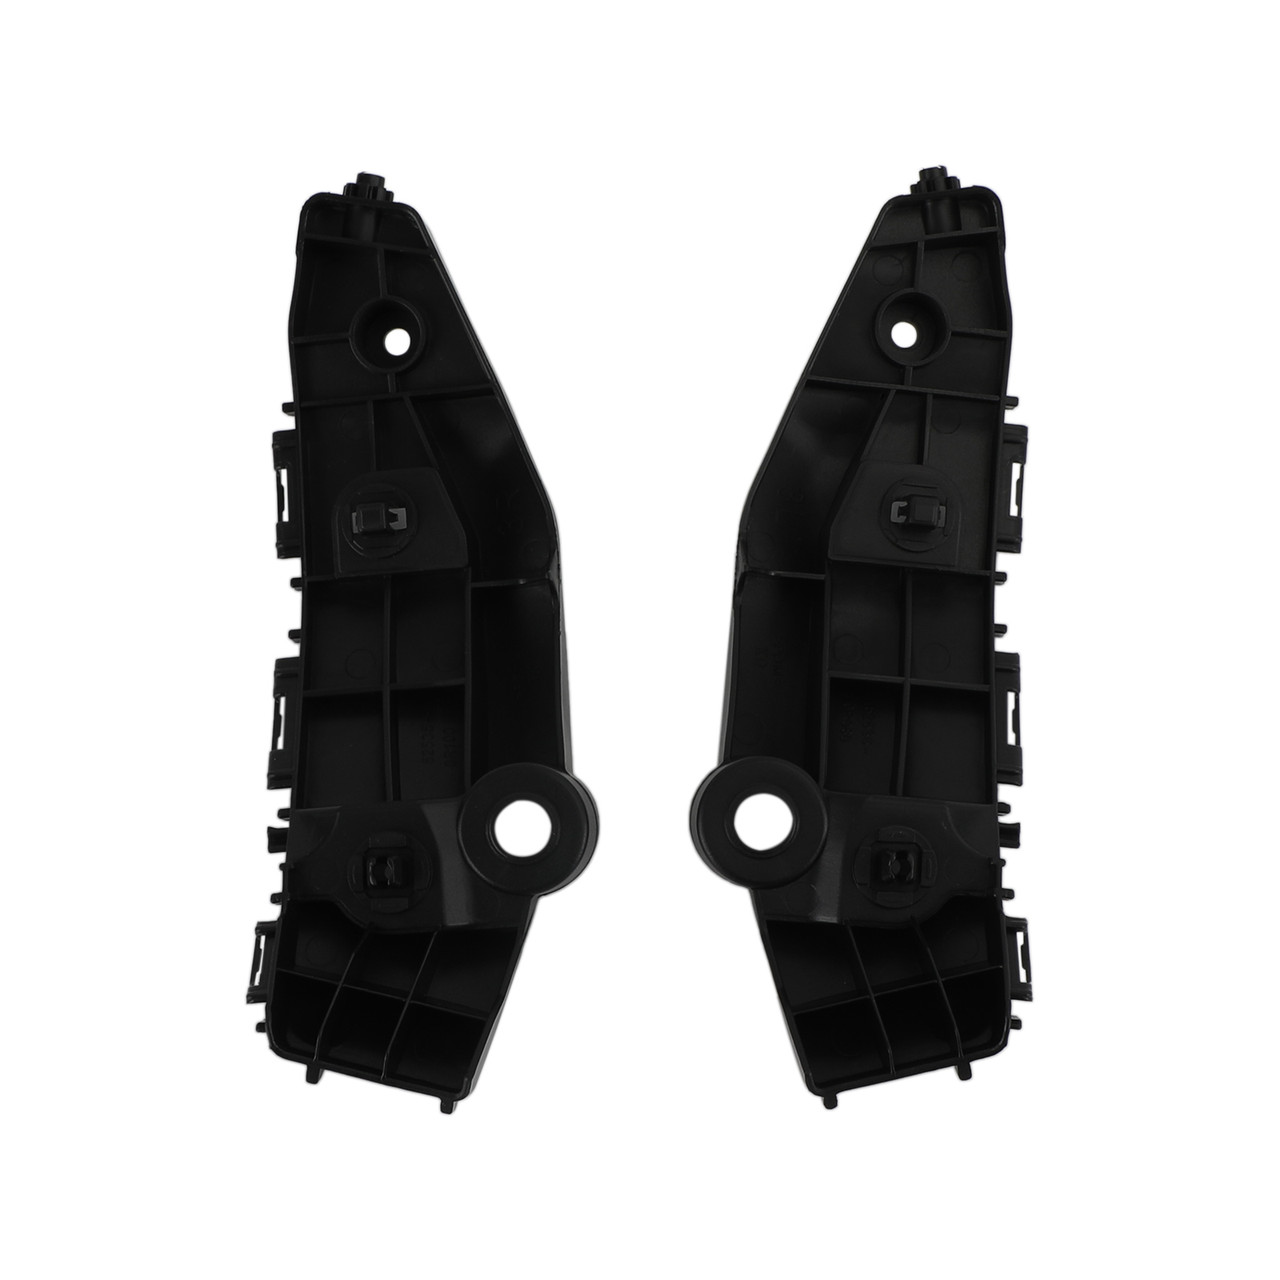 Pair of Front Bumper Support Spacer Retainer Brackets for Toyota Rav4 2019-2021